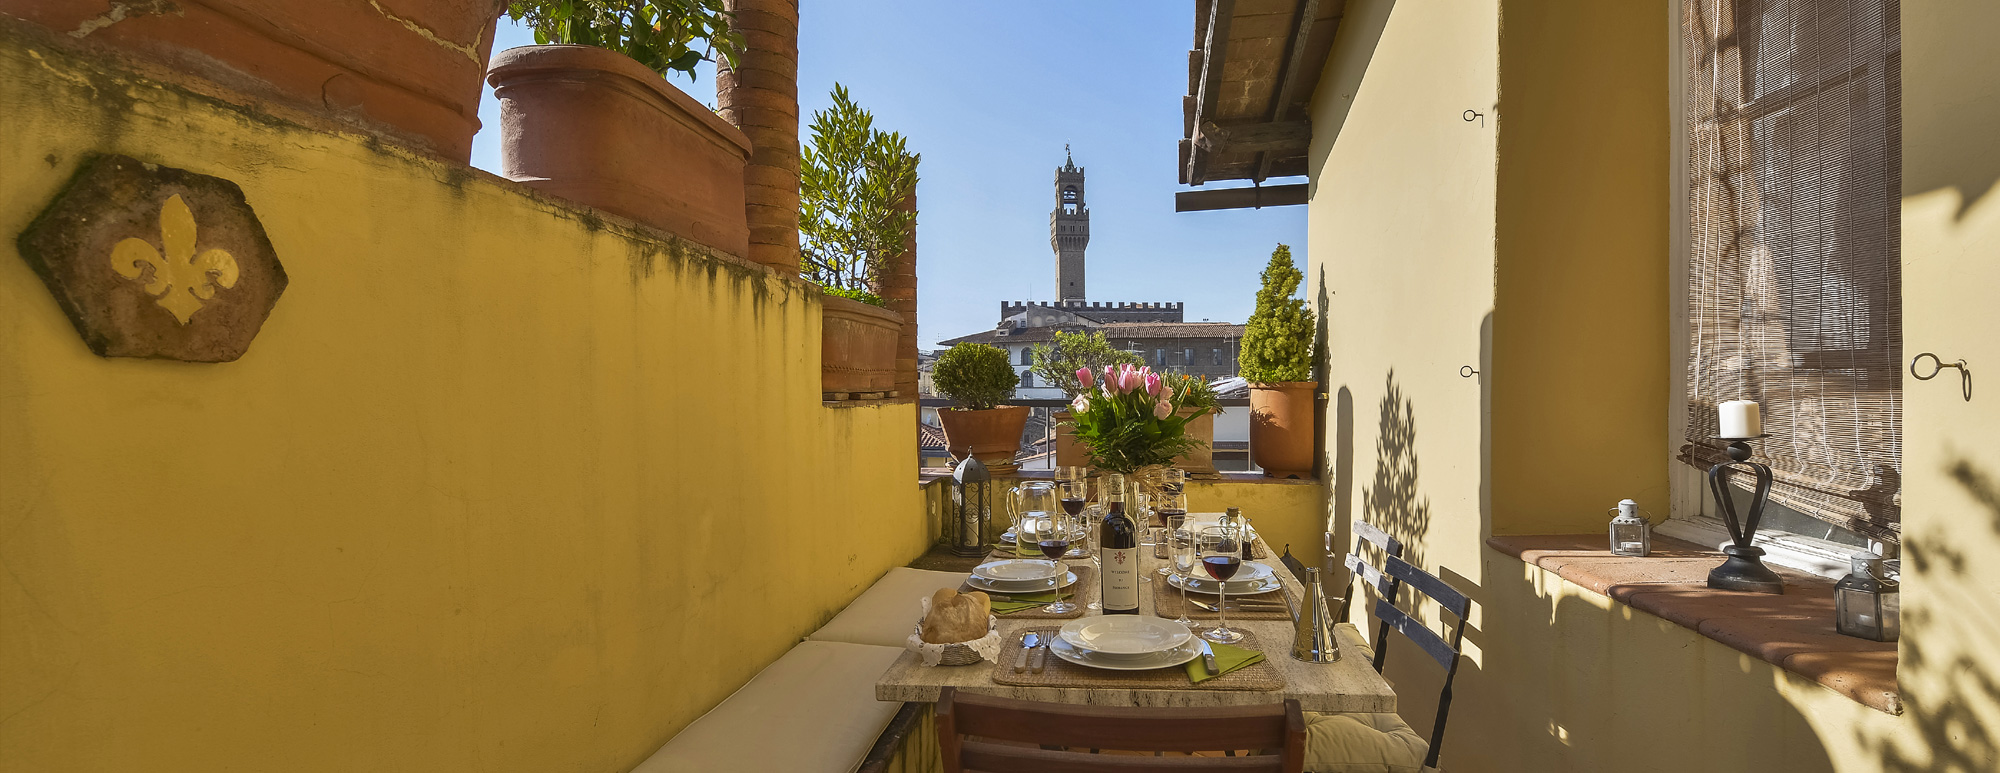 Terrace of the Altana Visconti apartment with a view of Palazzo Vecchio